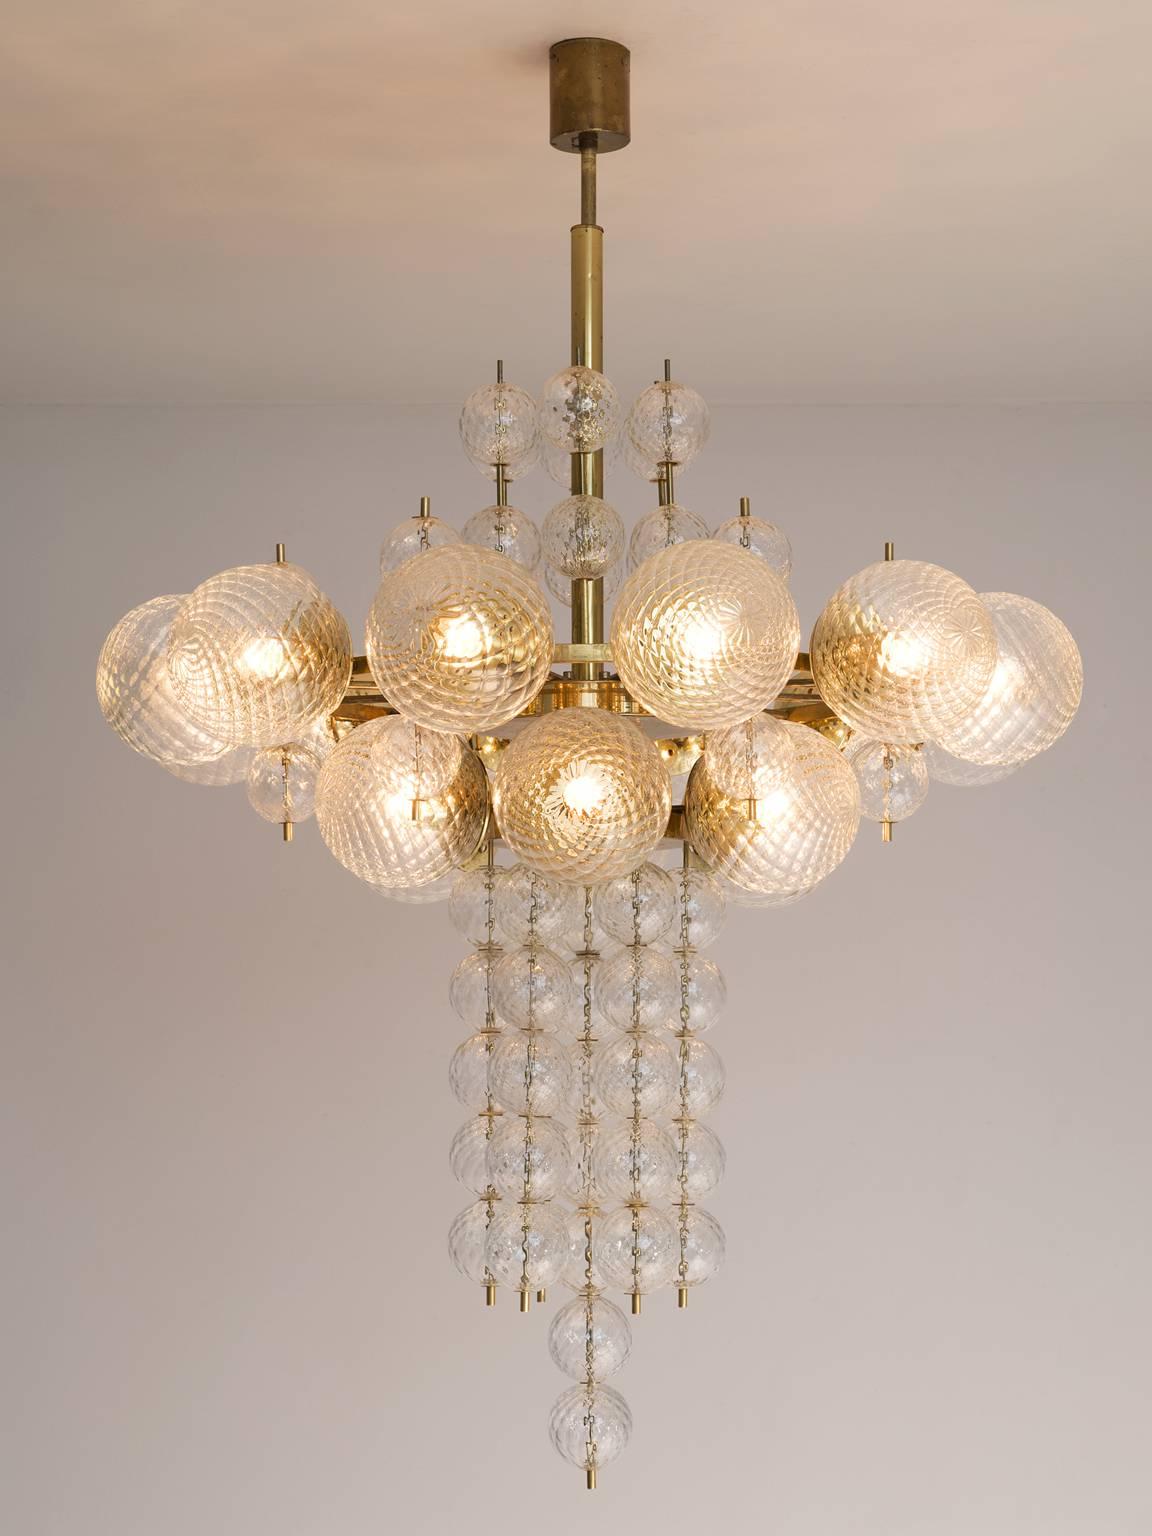 Chandelier in glass and brass, Europe 1970s.

Large chandelier in structured glass and brass. The structured glass brings a stunning light partition. The patinated brass creates a warm atmosphere. Four items available.

Price listed per item